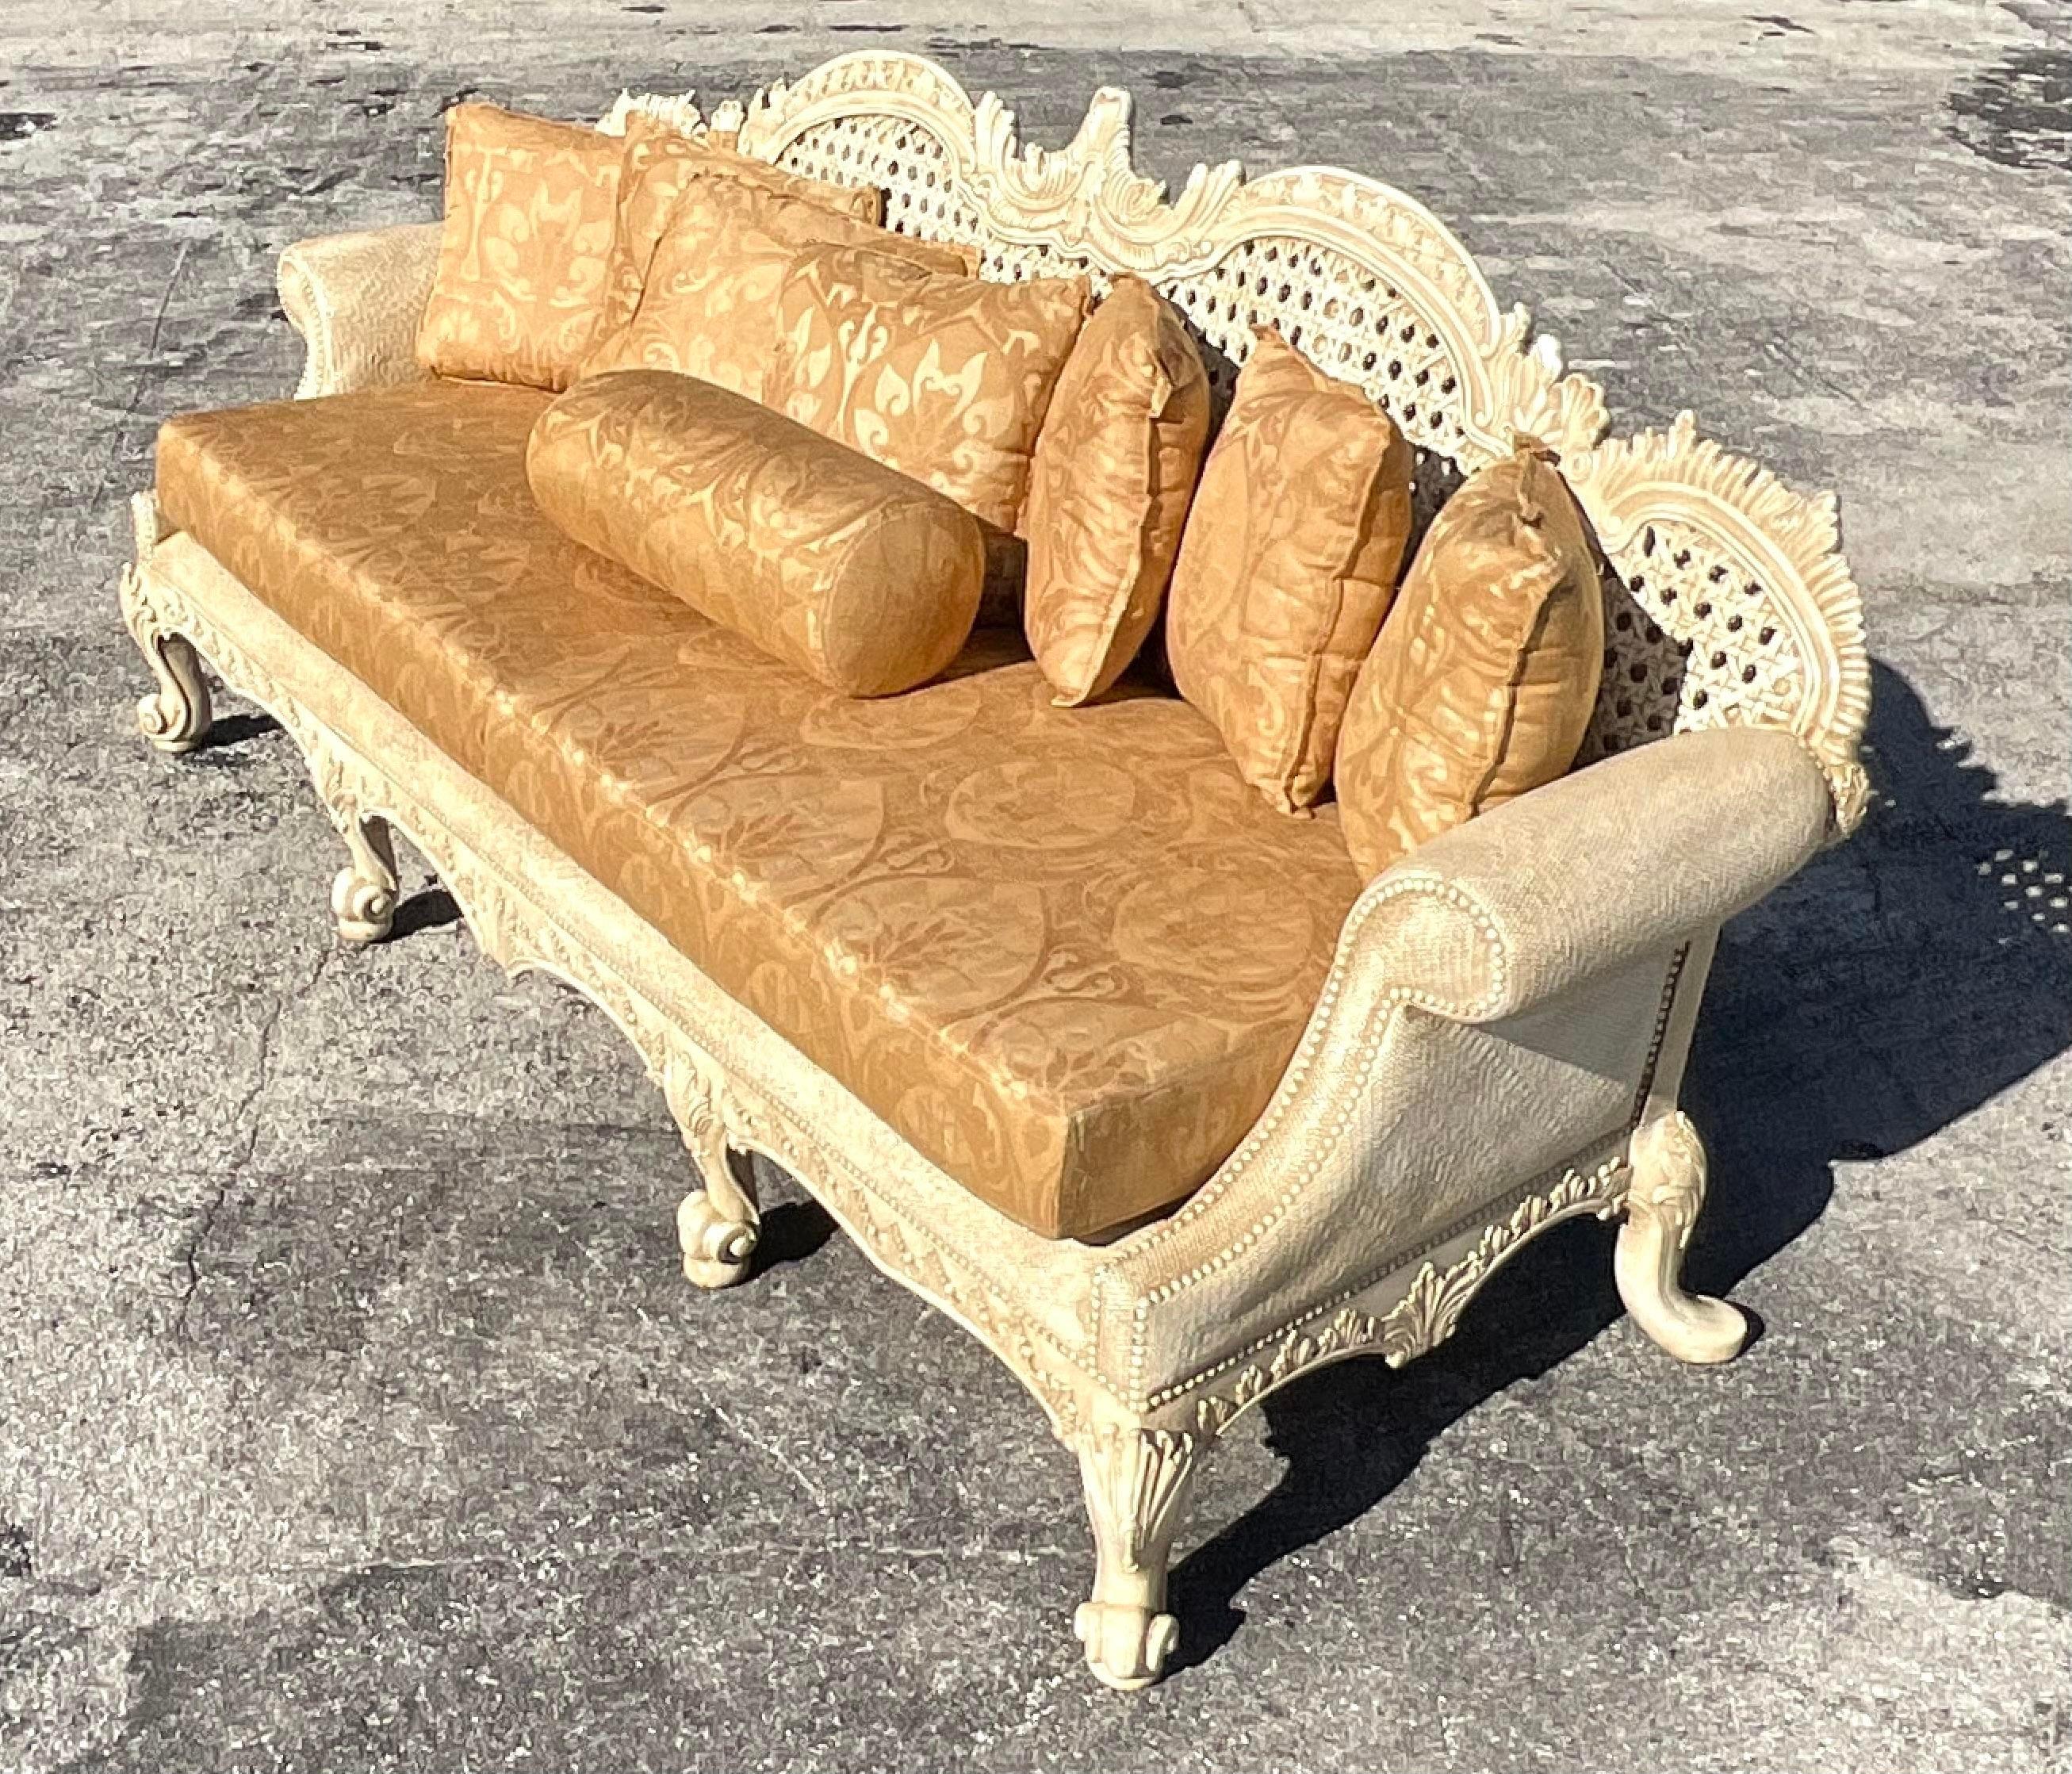 A fabulous vintage Regency hand carved sofa. Made by the iconic Maitland Smith group. Beautiful inset large cane panels in a deep seat shape. Marked on the bottom. Two sofas available as well for a striking pair. Acquired from a Palm Beach estate.